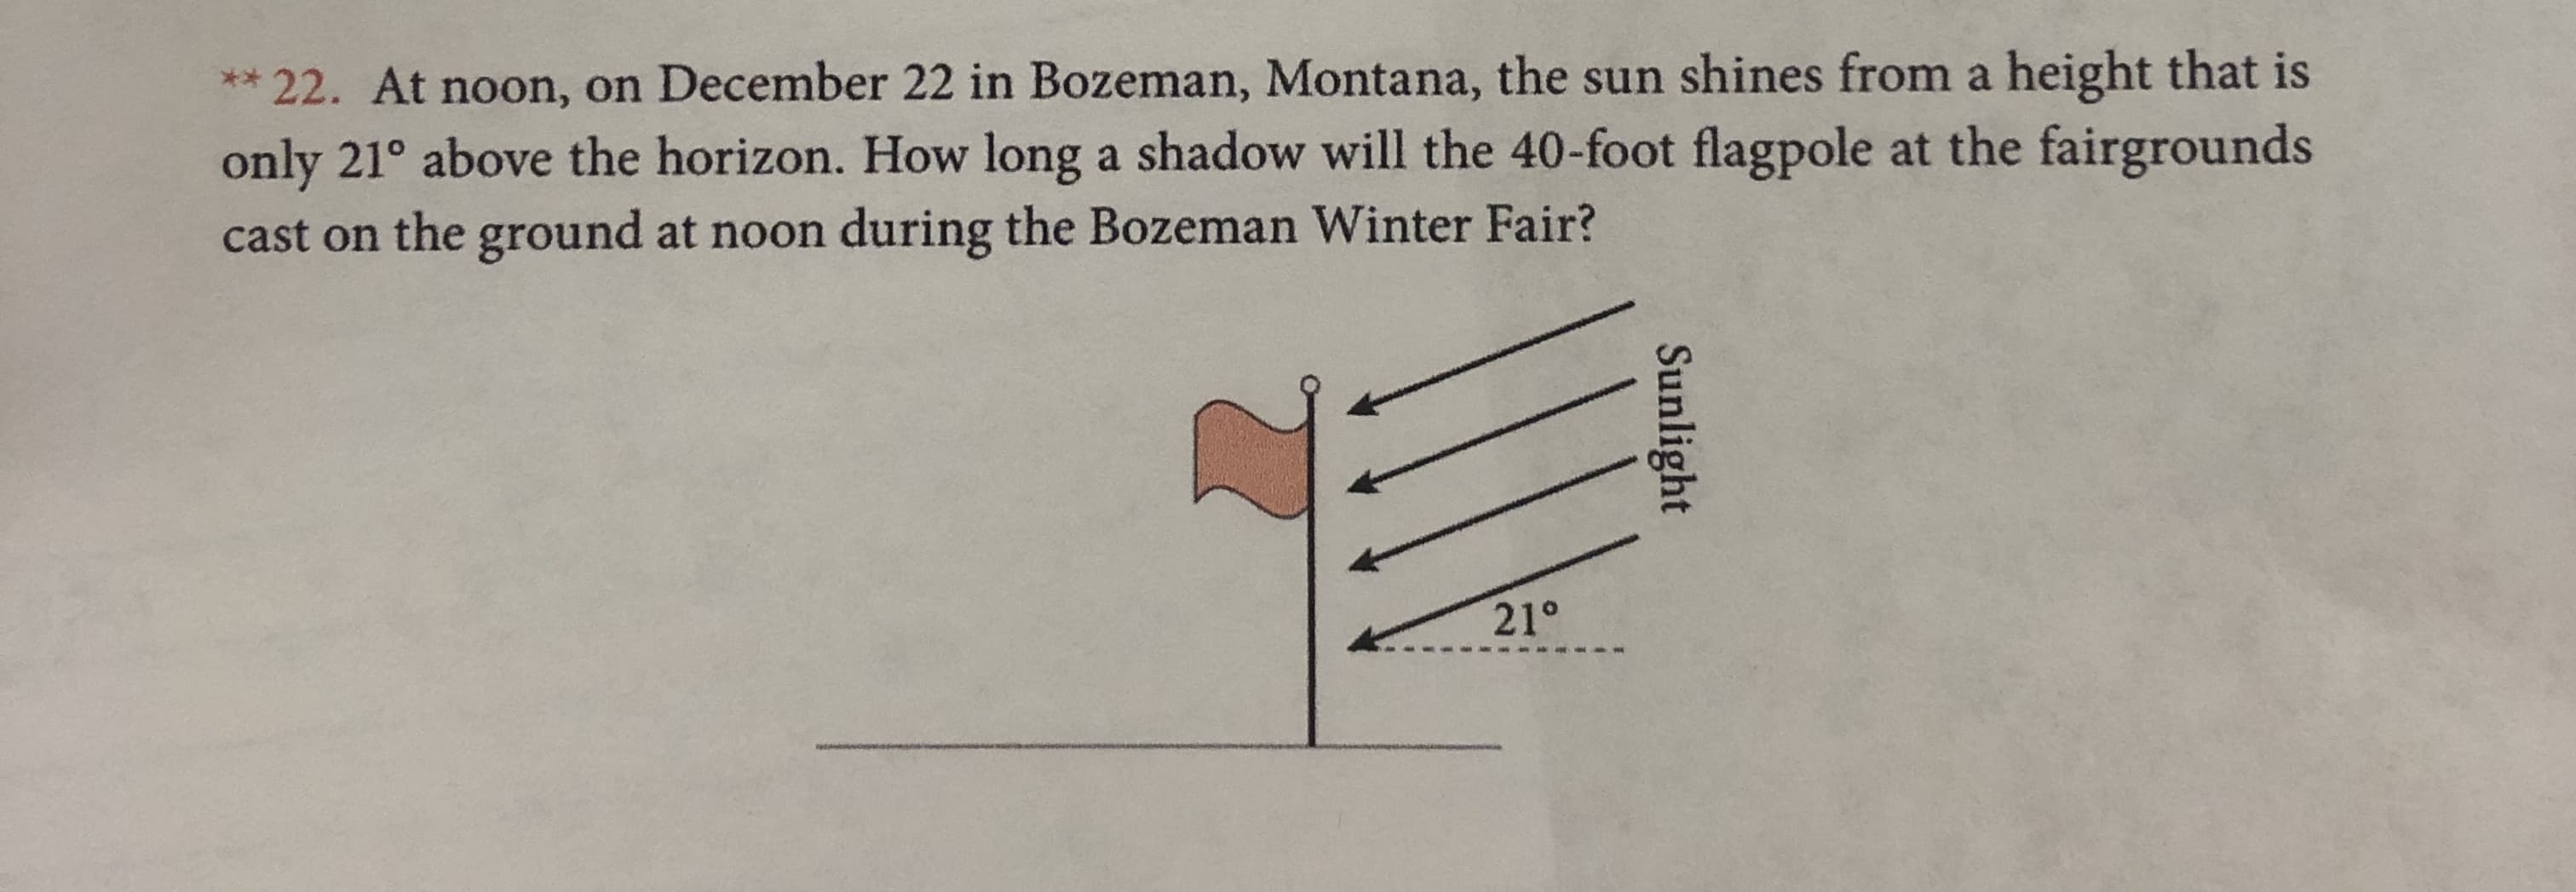 *22. At noon, on December 22 in Bozeman, Montana, the sun shines from a height that is
only 21° above the horizon. How long a shadow will the 40-foot flagpole at the fairgrounds
cast on the ground at noon during the Bozeman Winter Fair?
21°
Sunlight
